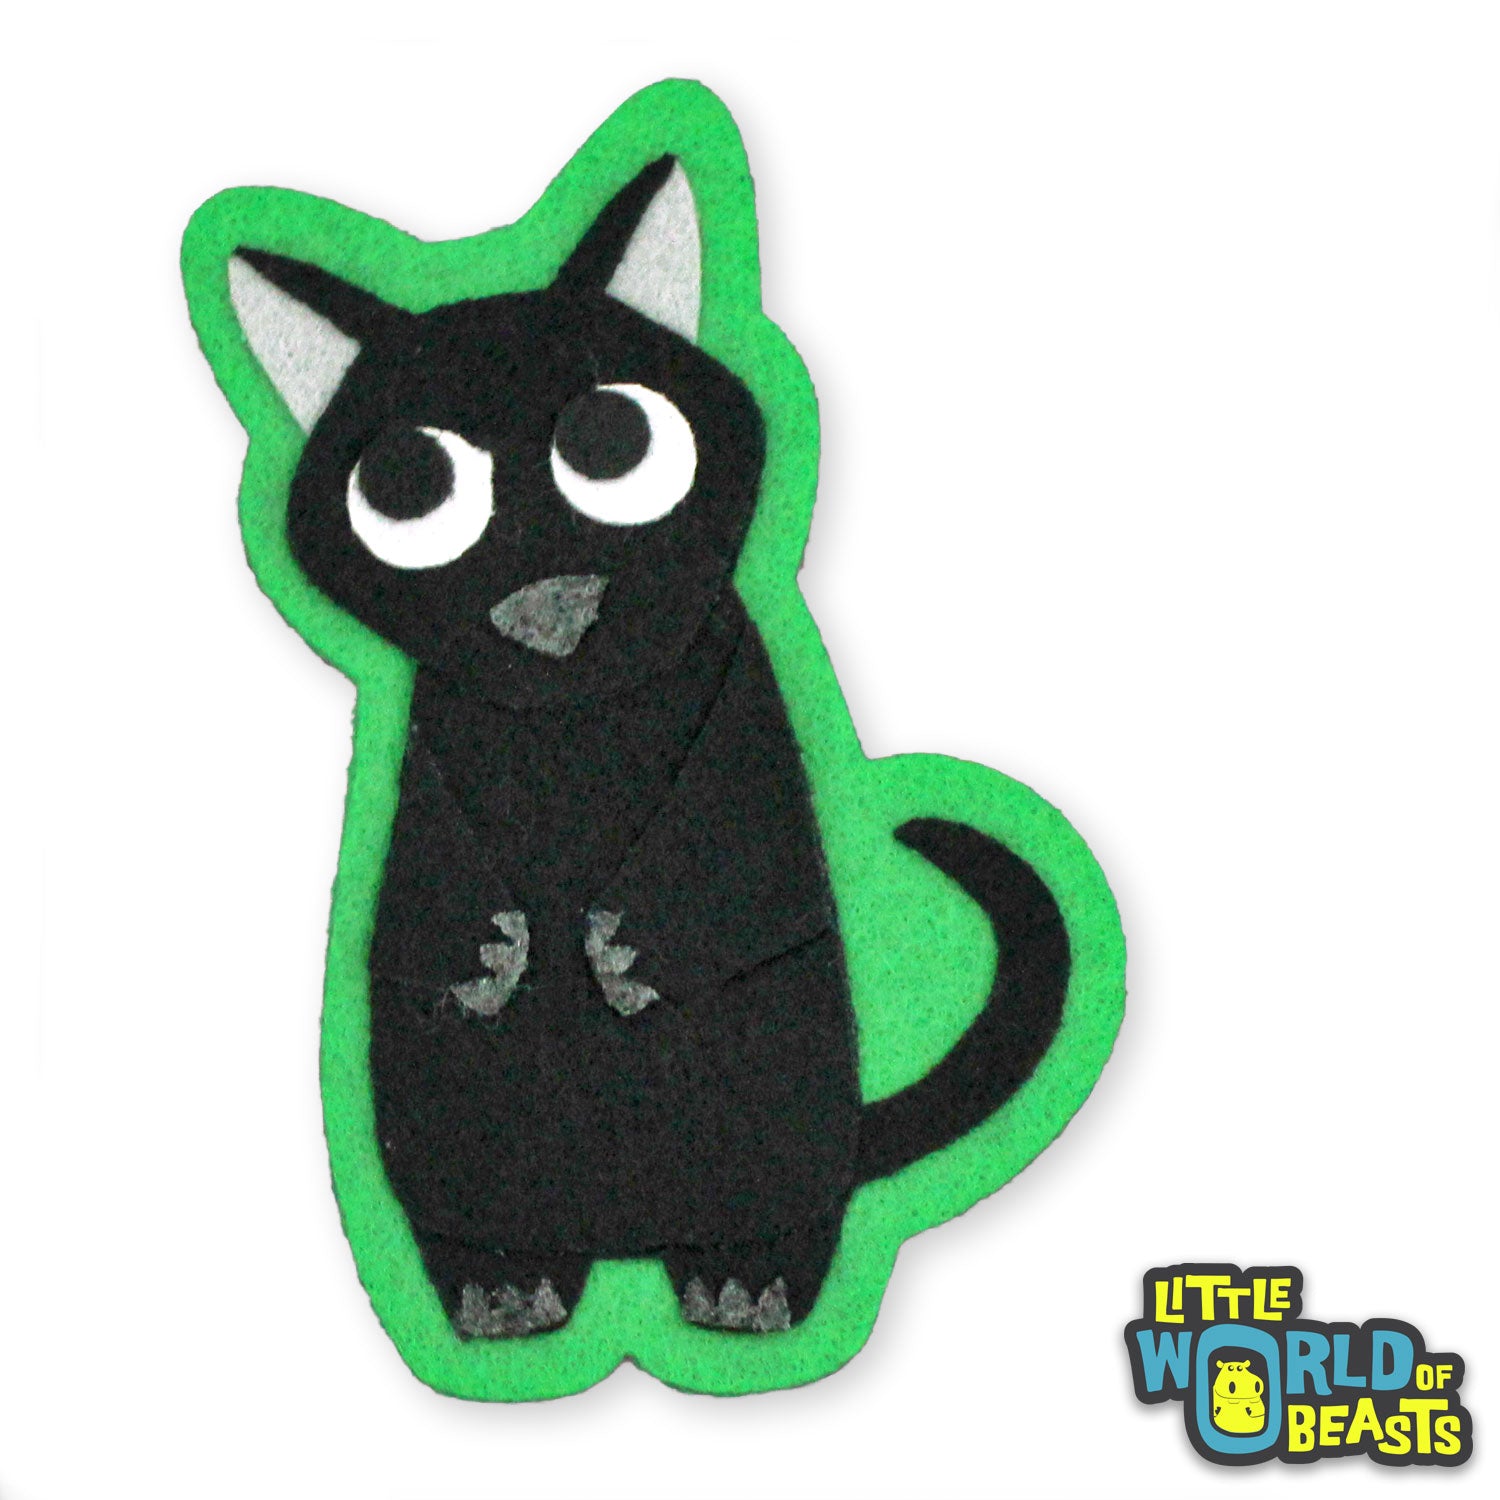 Tas the Black Cat - Sew on or Iron on Patch - Little World of Beasts